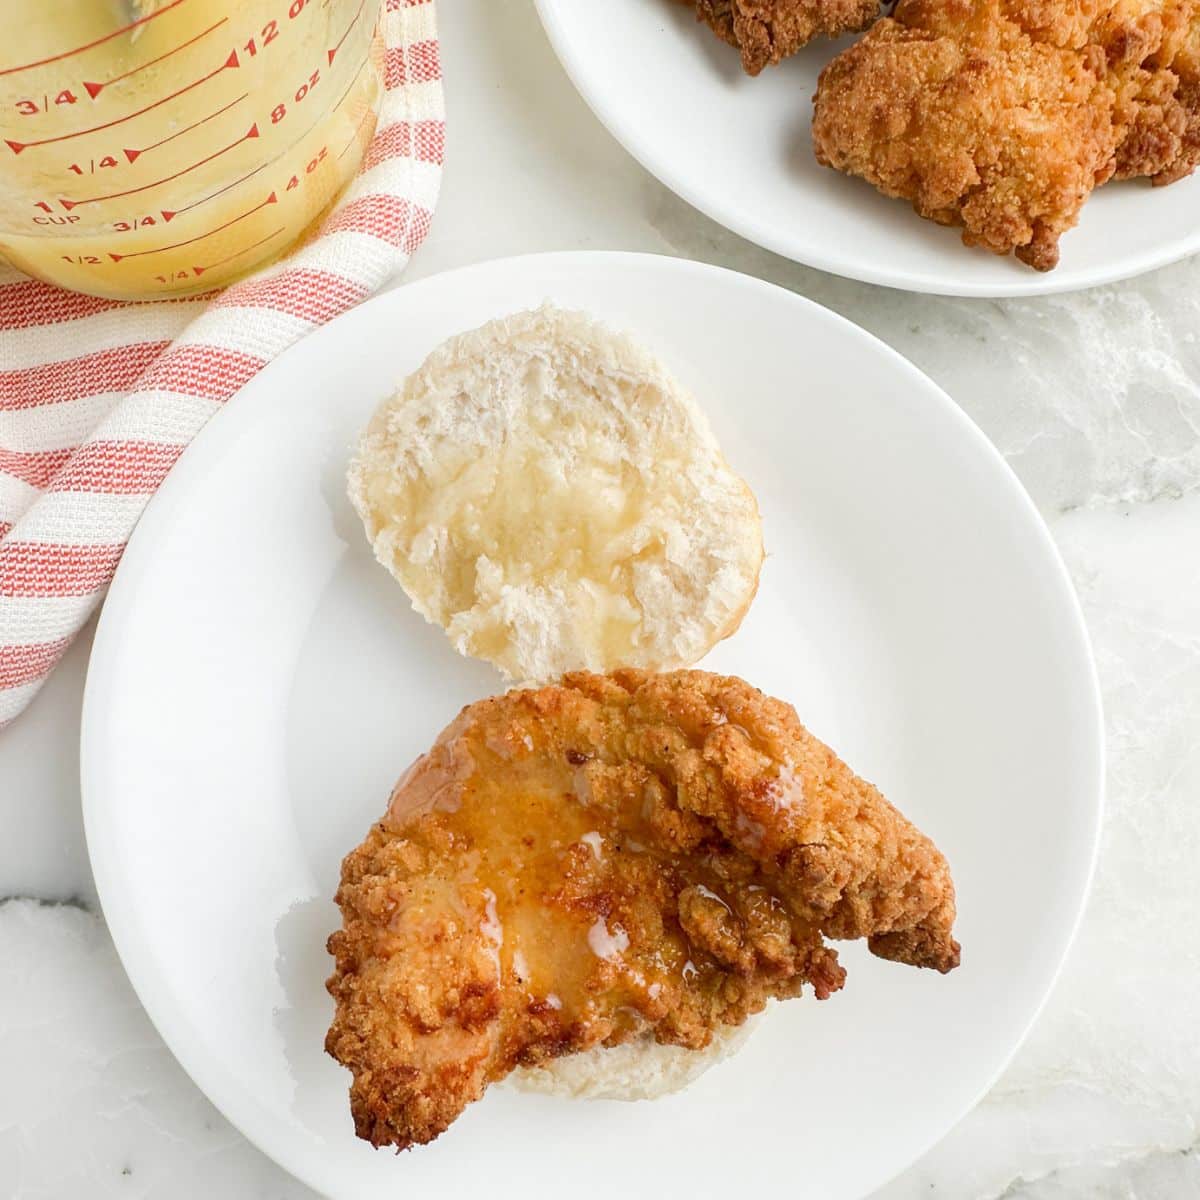 Biscuit topped with a chicken tender and honey.